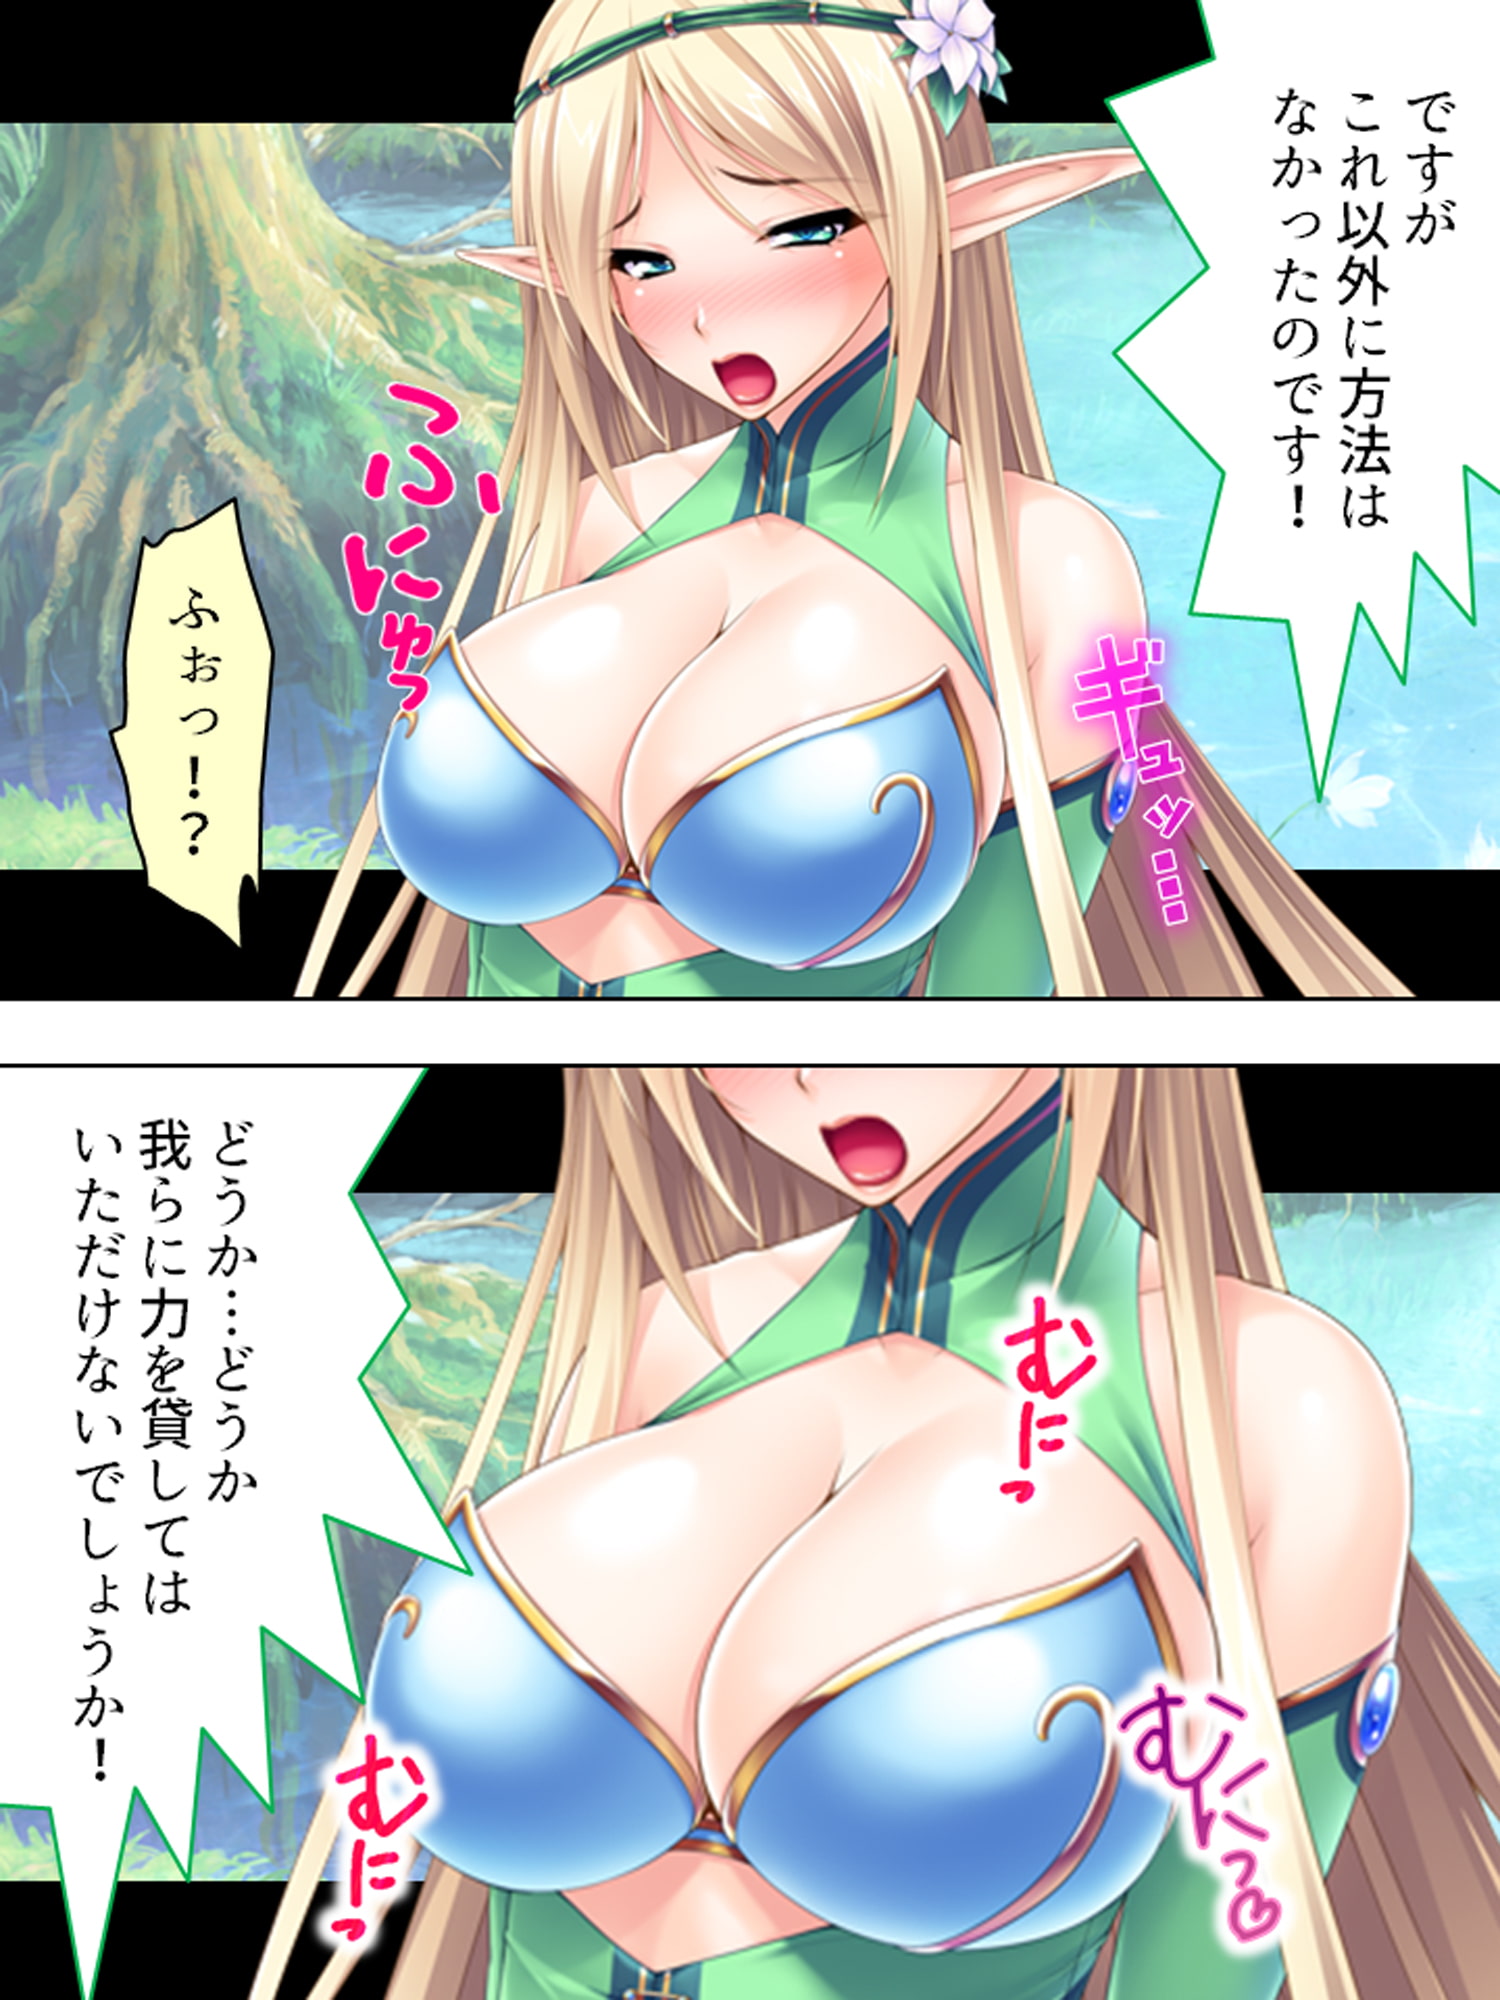 Using Isekai Cheats to Impregnate the Busty Female Knight! Part 1